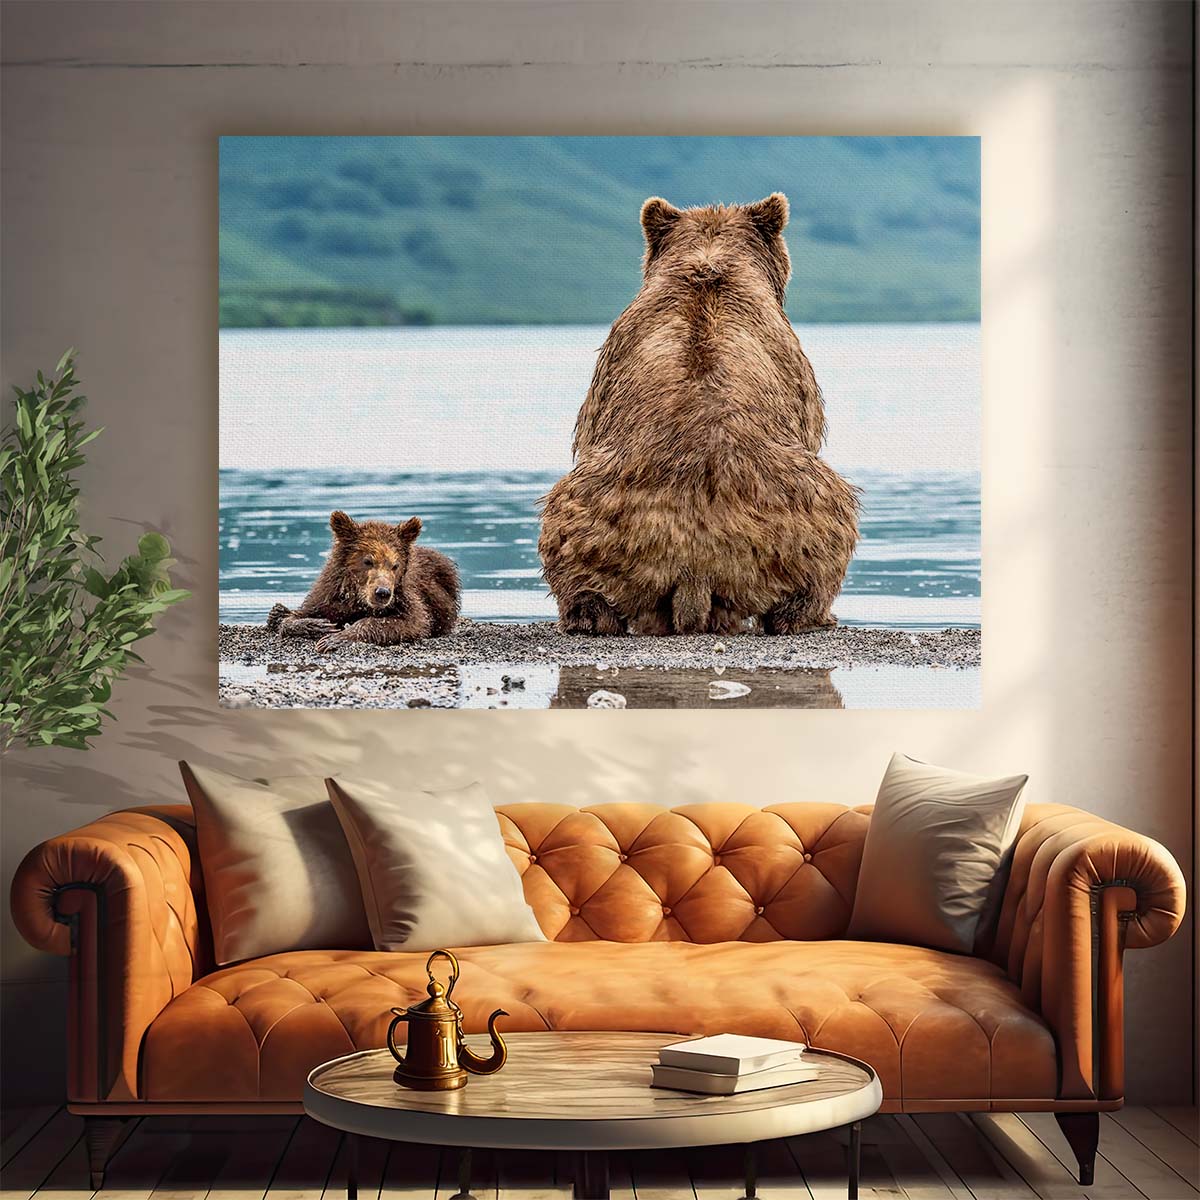 Kamchatka Bear Cubs Lakeside Fun Wall Art by Luxuriance Designs. Made in USA.